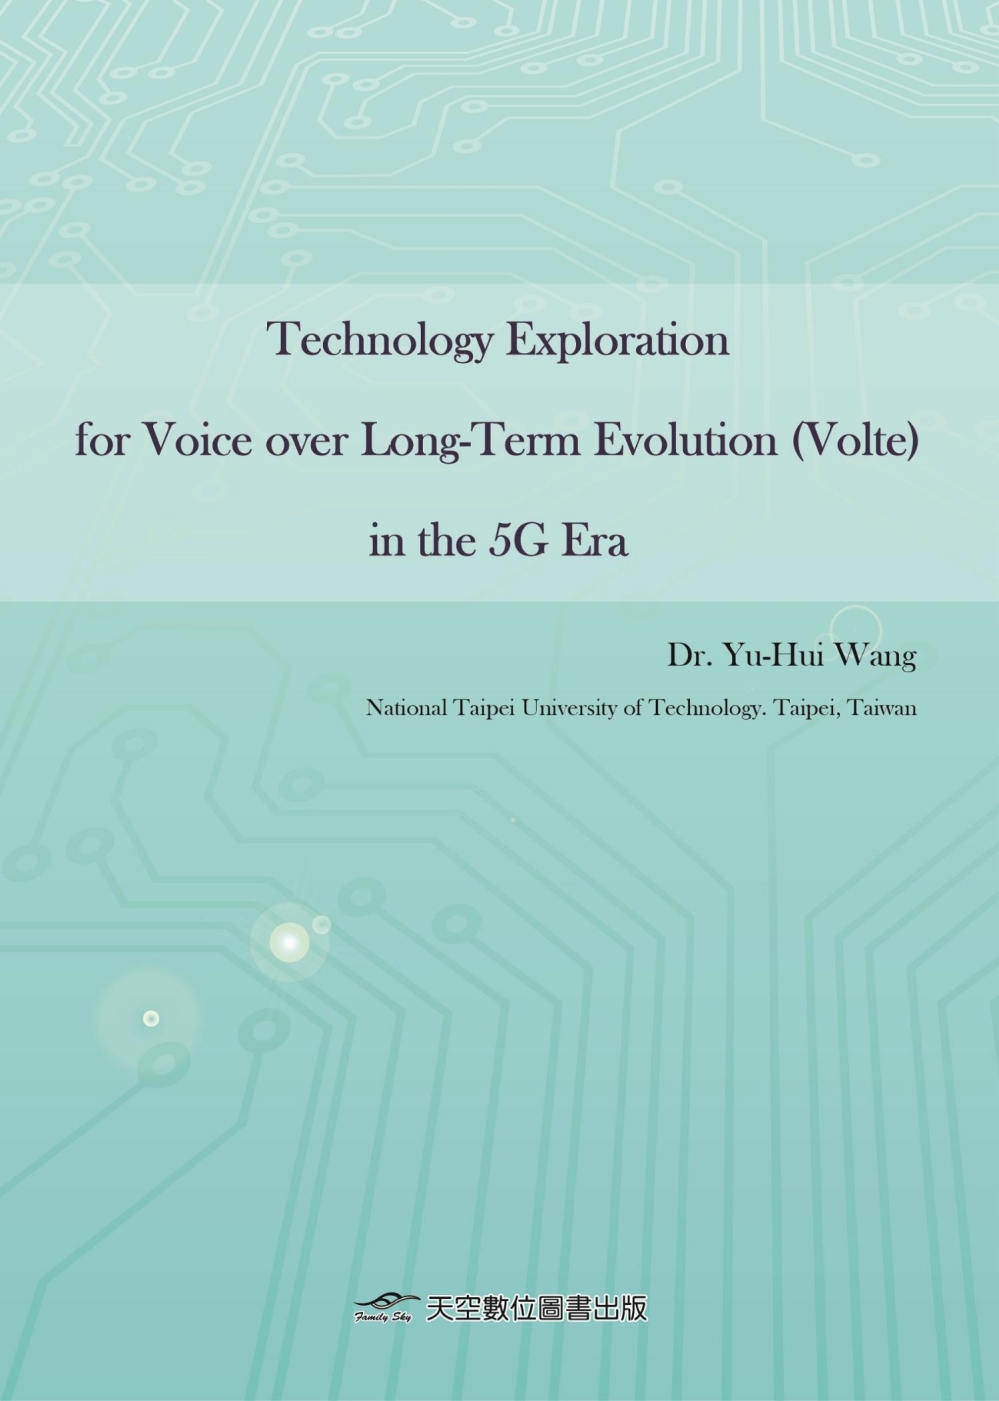 Technology Exploration for Voice over Long-Term Evolution (Volte) in the 5G Era